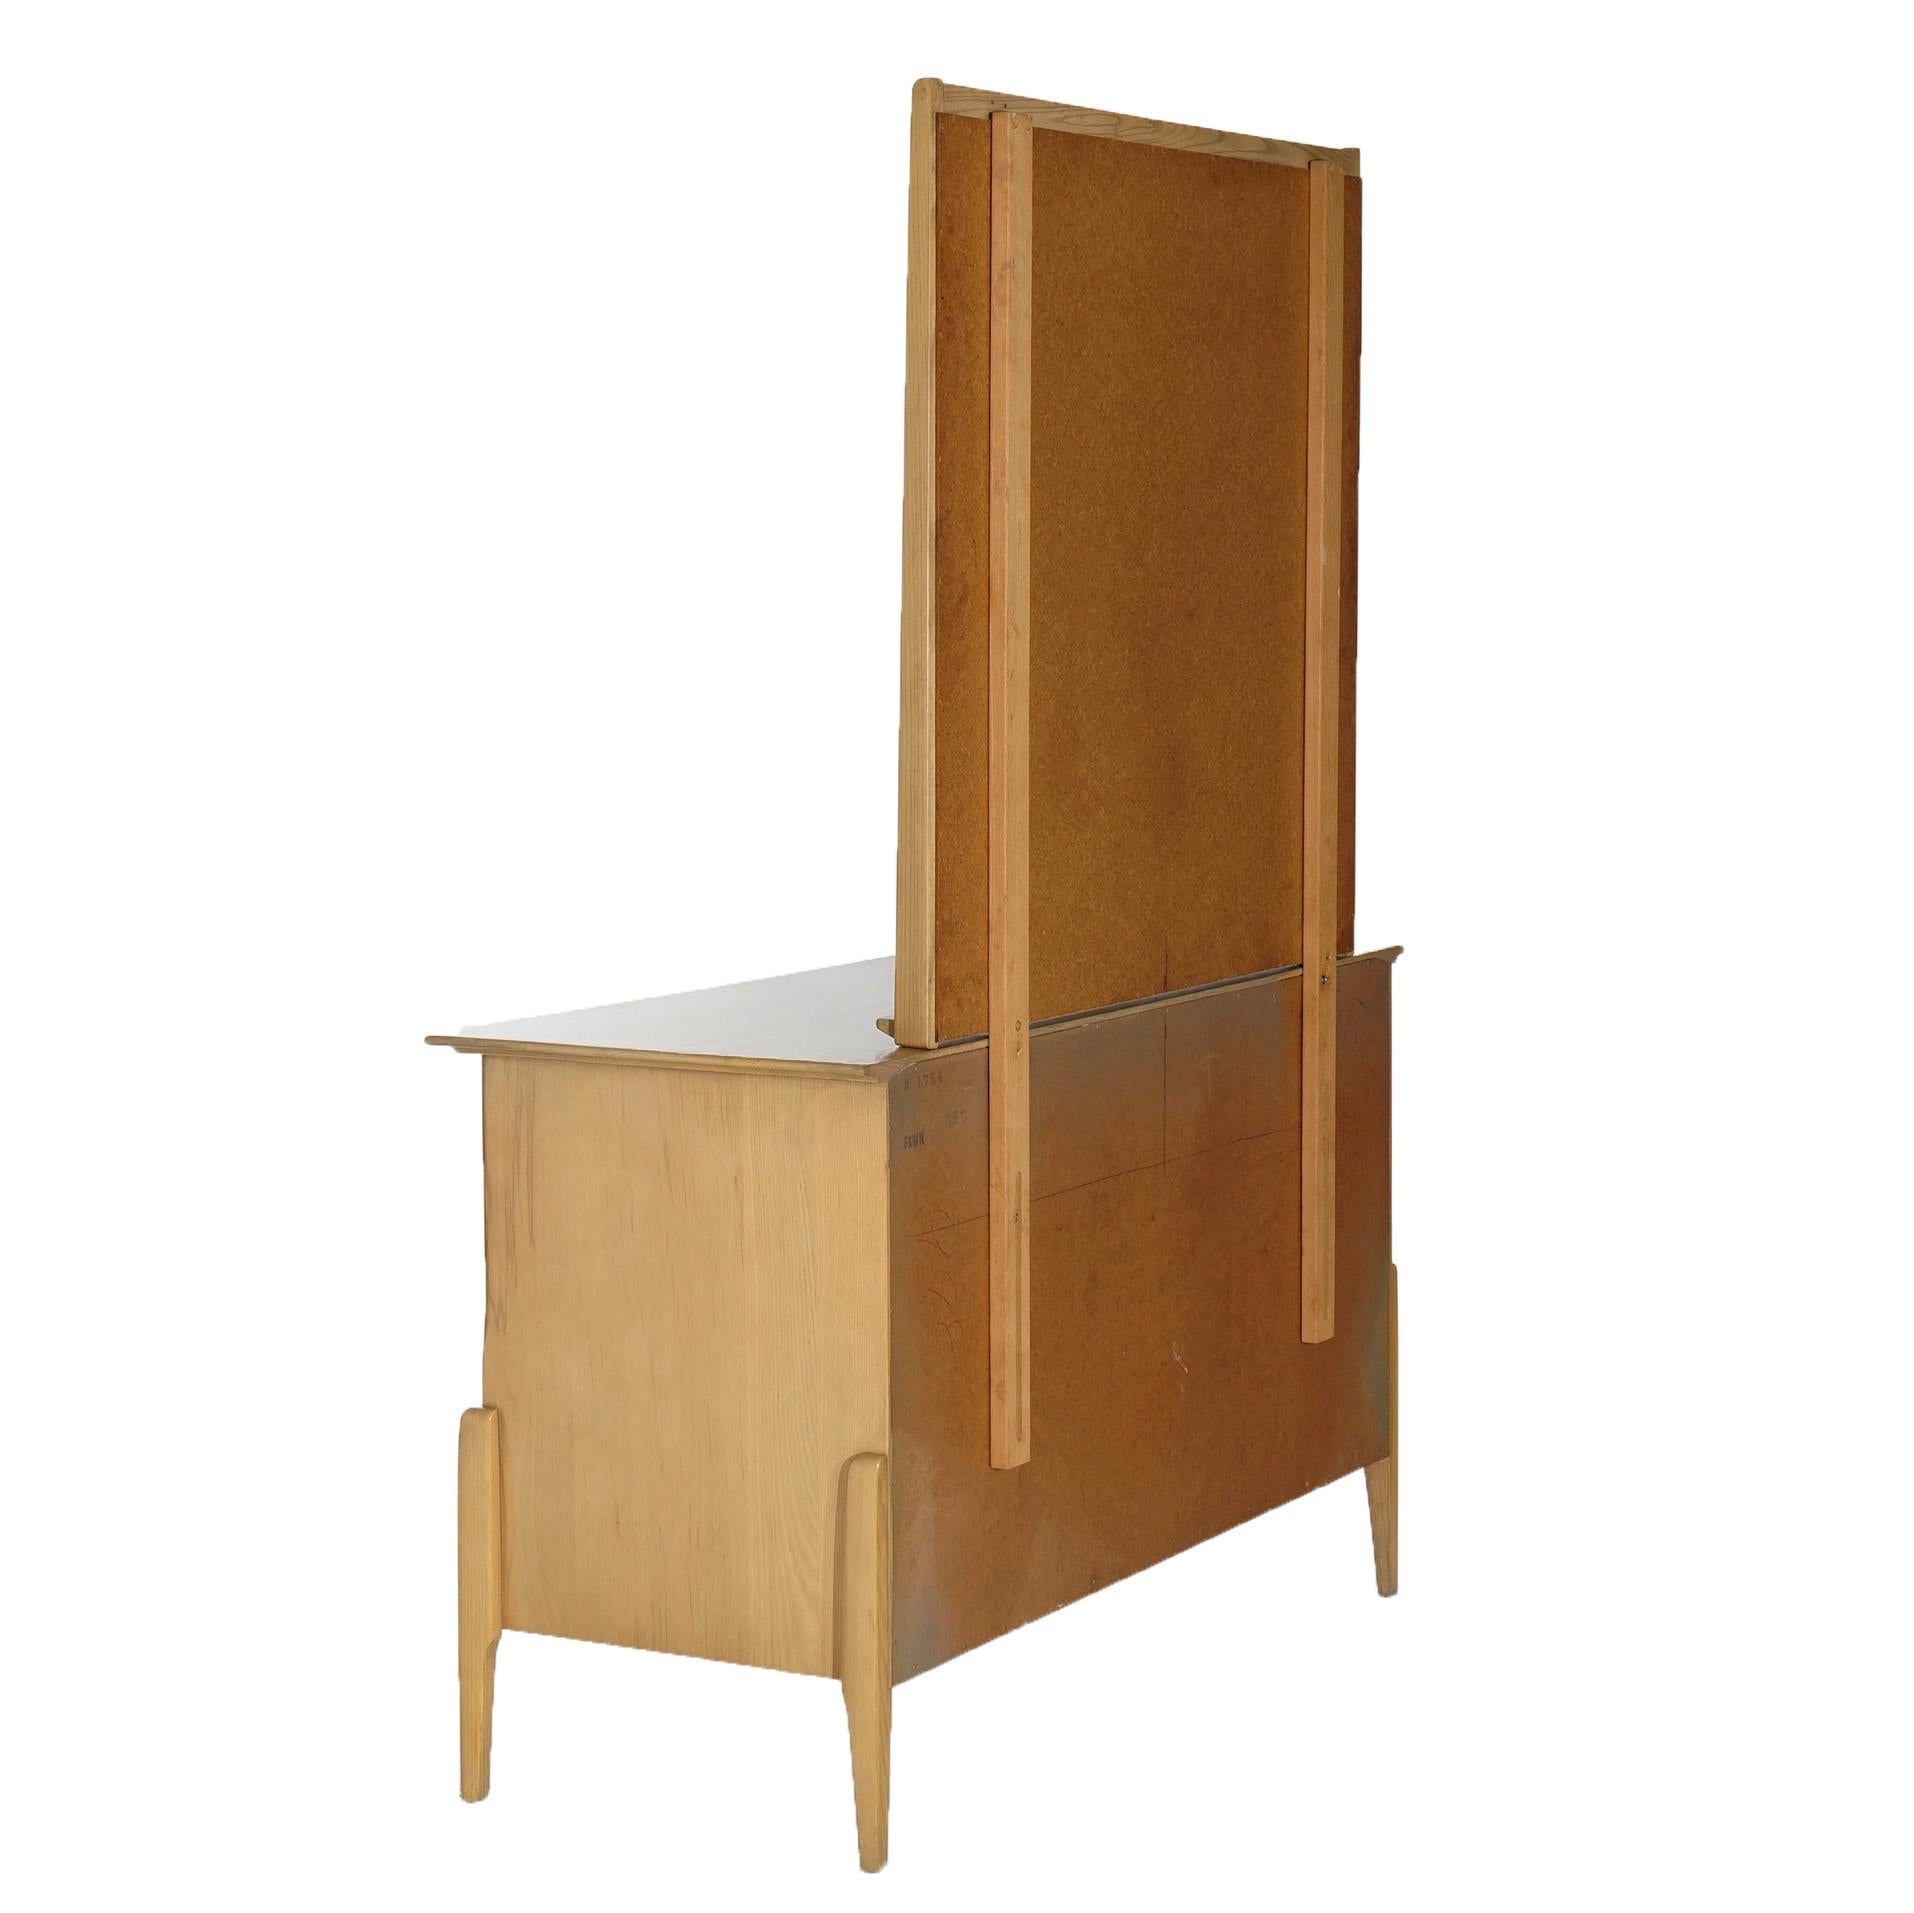 20th Century Mid-Century Modern Heywood Wakefield Prophecy Dresser with Mirror in Fawn, C1950